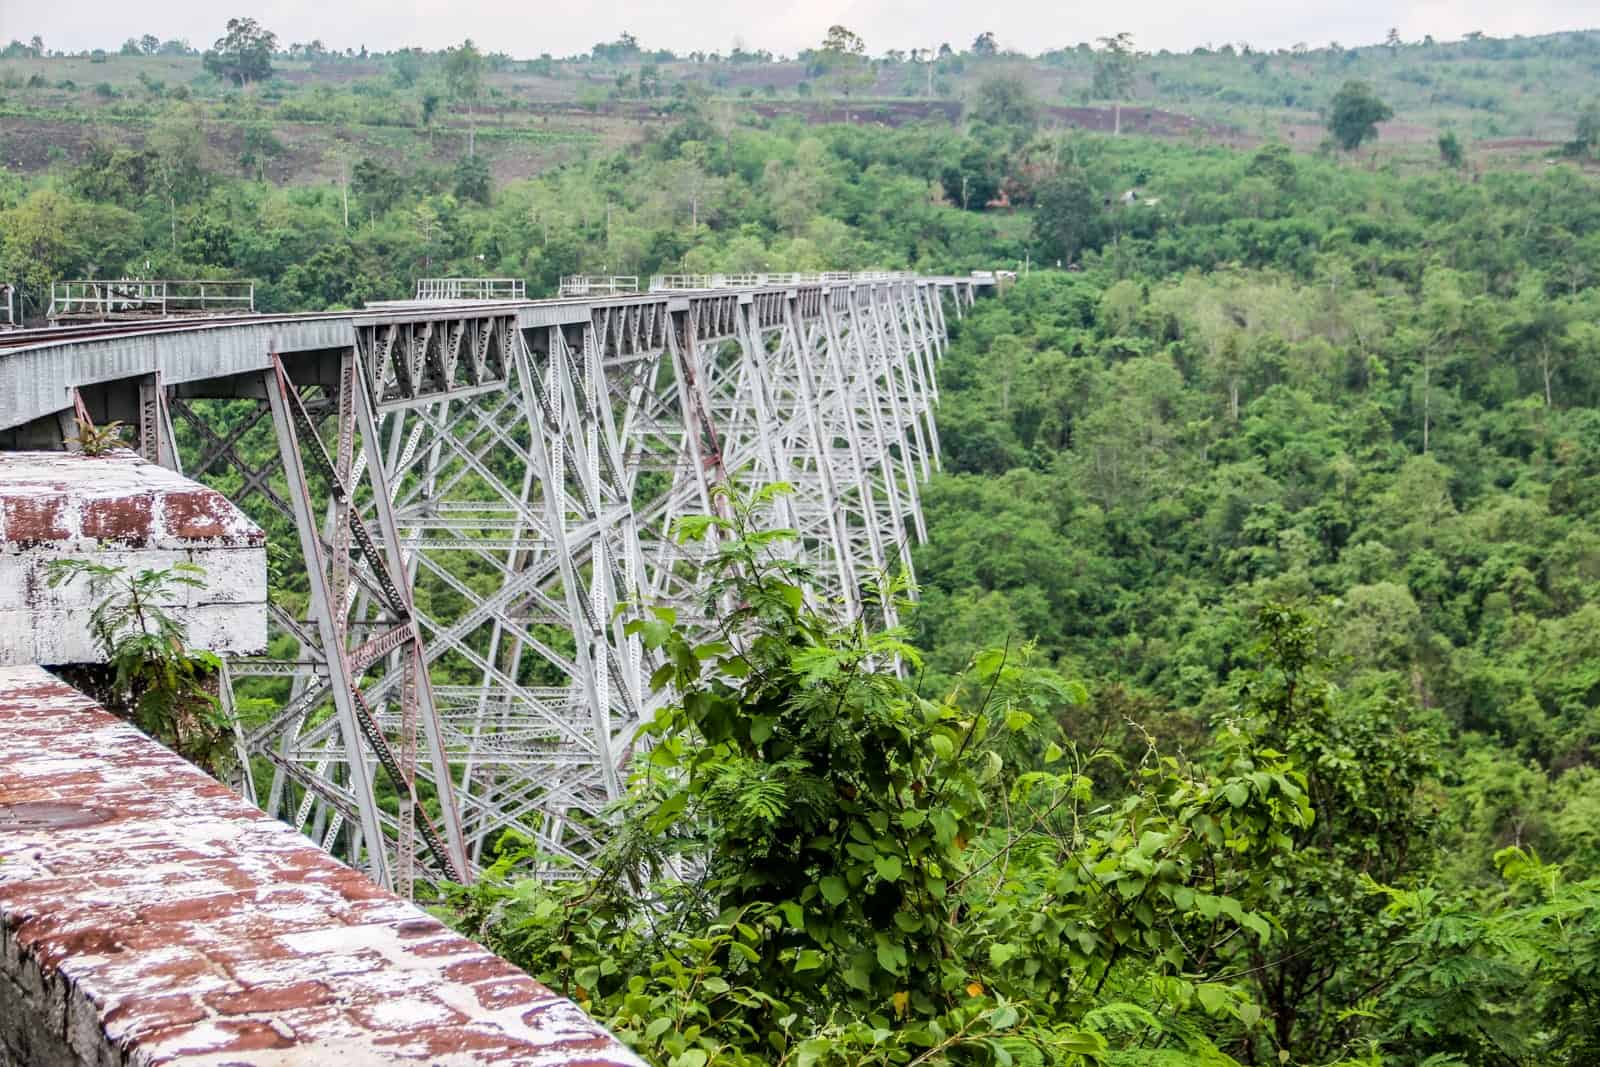 Approaching the Myanmar Goteik Viaduct Bridge and crossing it on the train